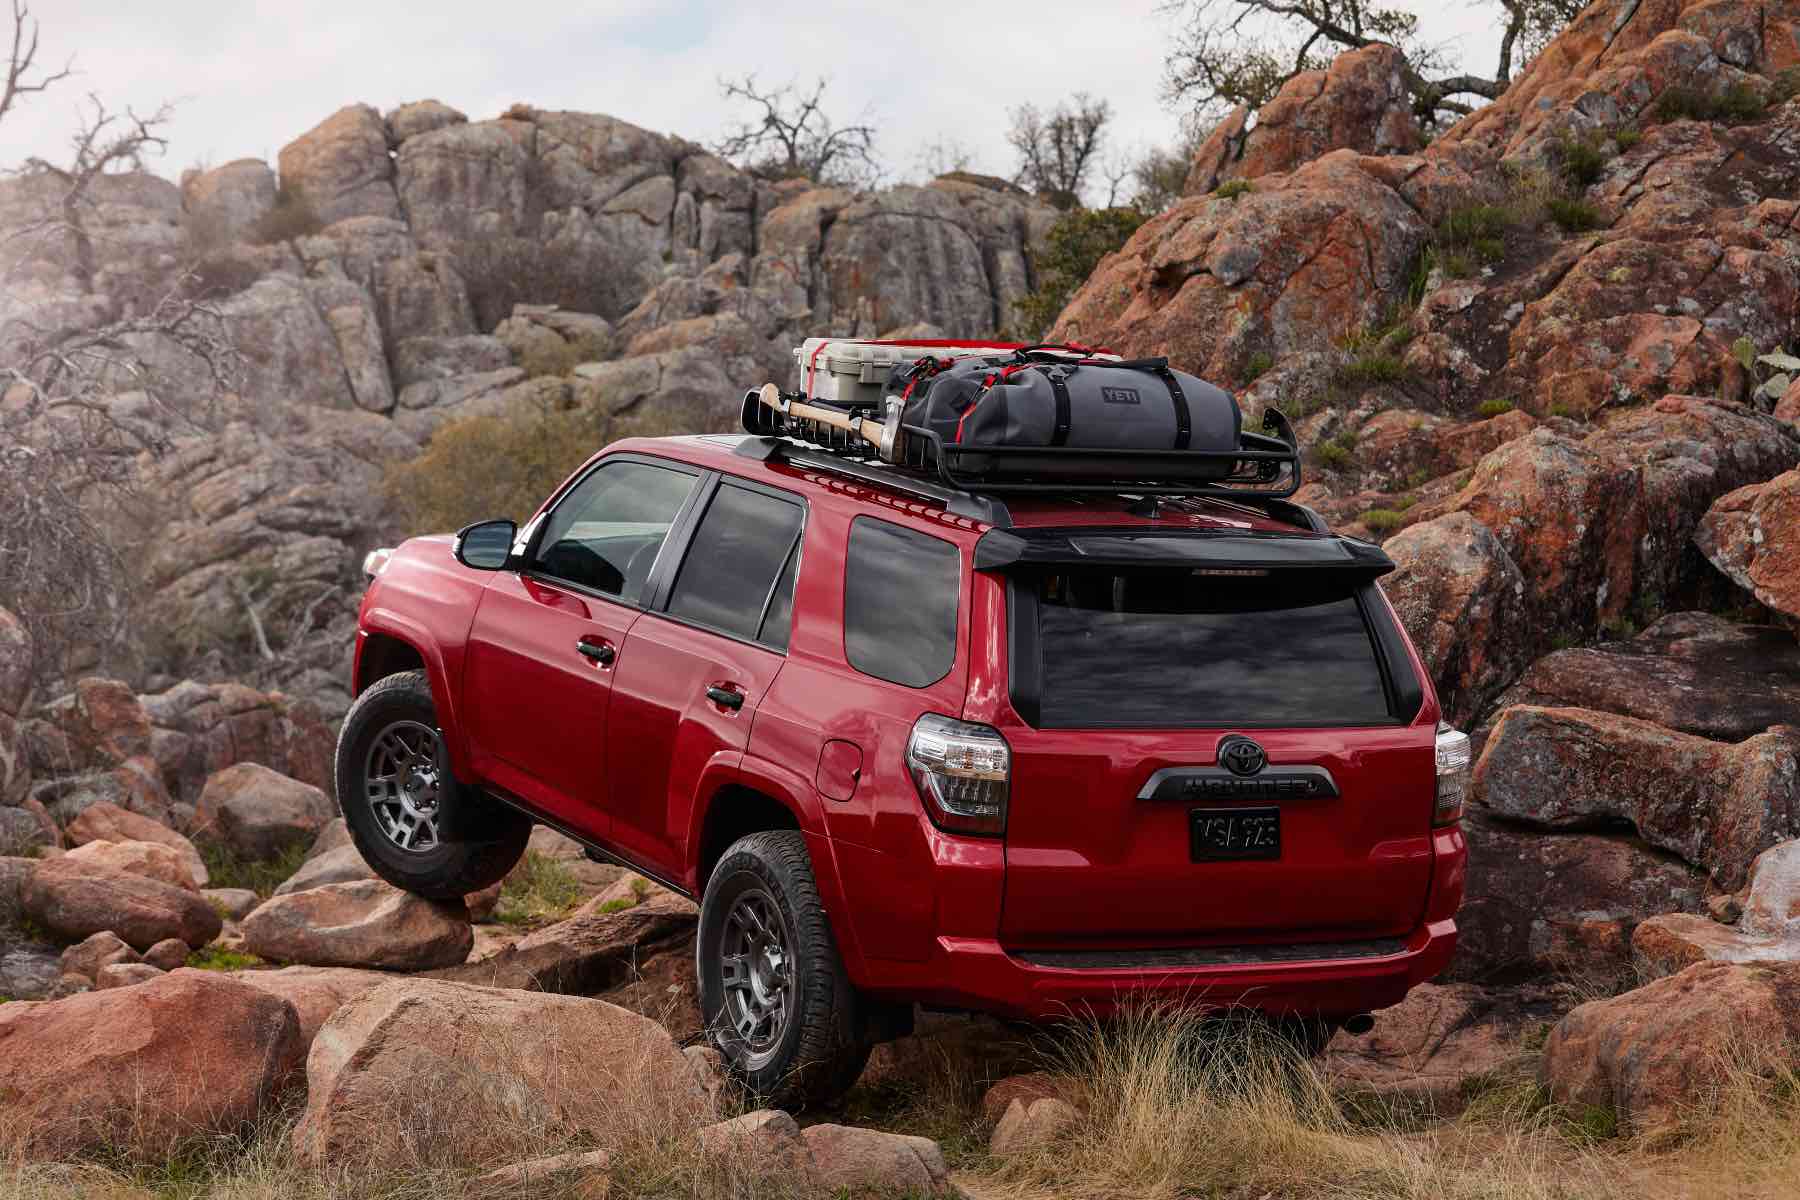 A red Toyota 4Runner climbs up a rocky slope. The 4Runner is the Toyota's closest model to the Lexus GX.